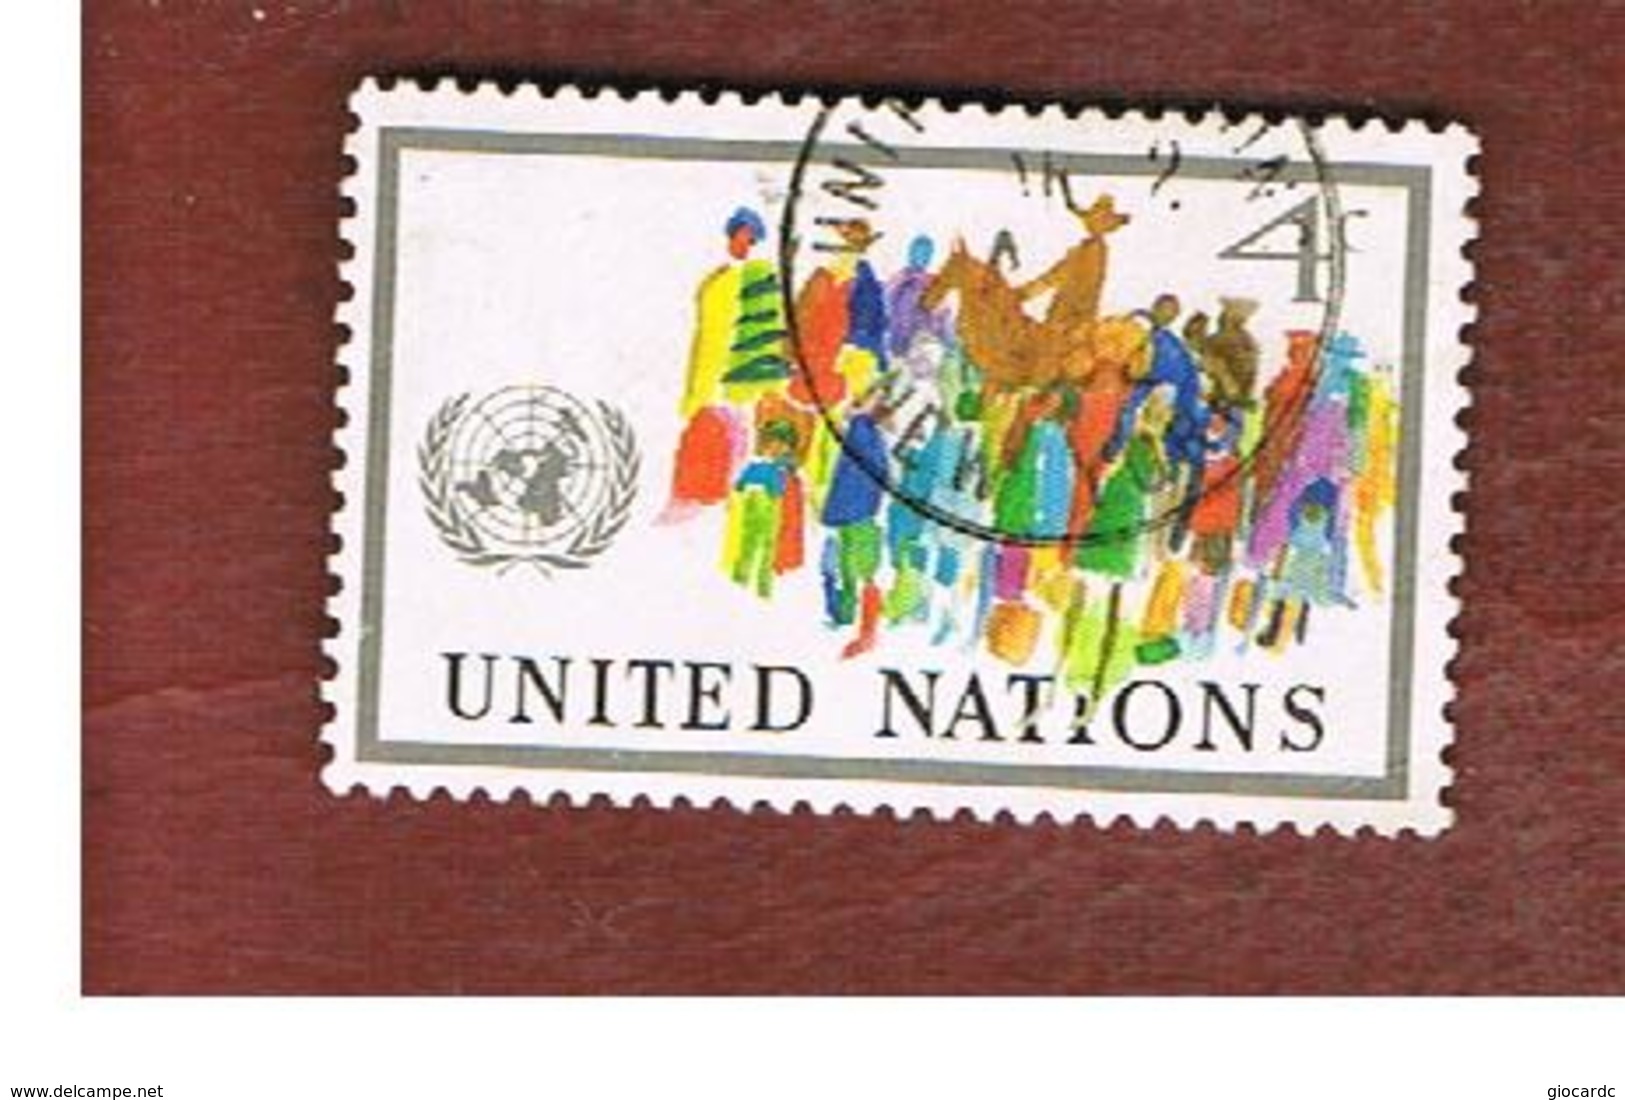 ONU (UNITED NATIONS) NEW YORK   - SG NY275   -  1976 GATHERING OF PEOPLES  - USED - Oblitérés